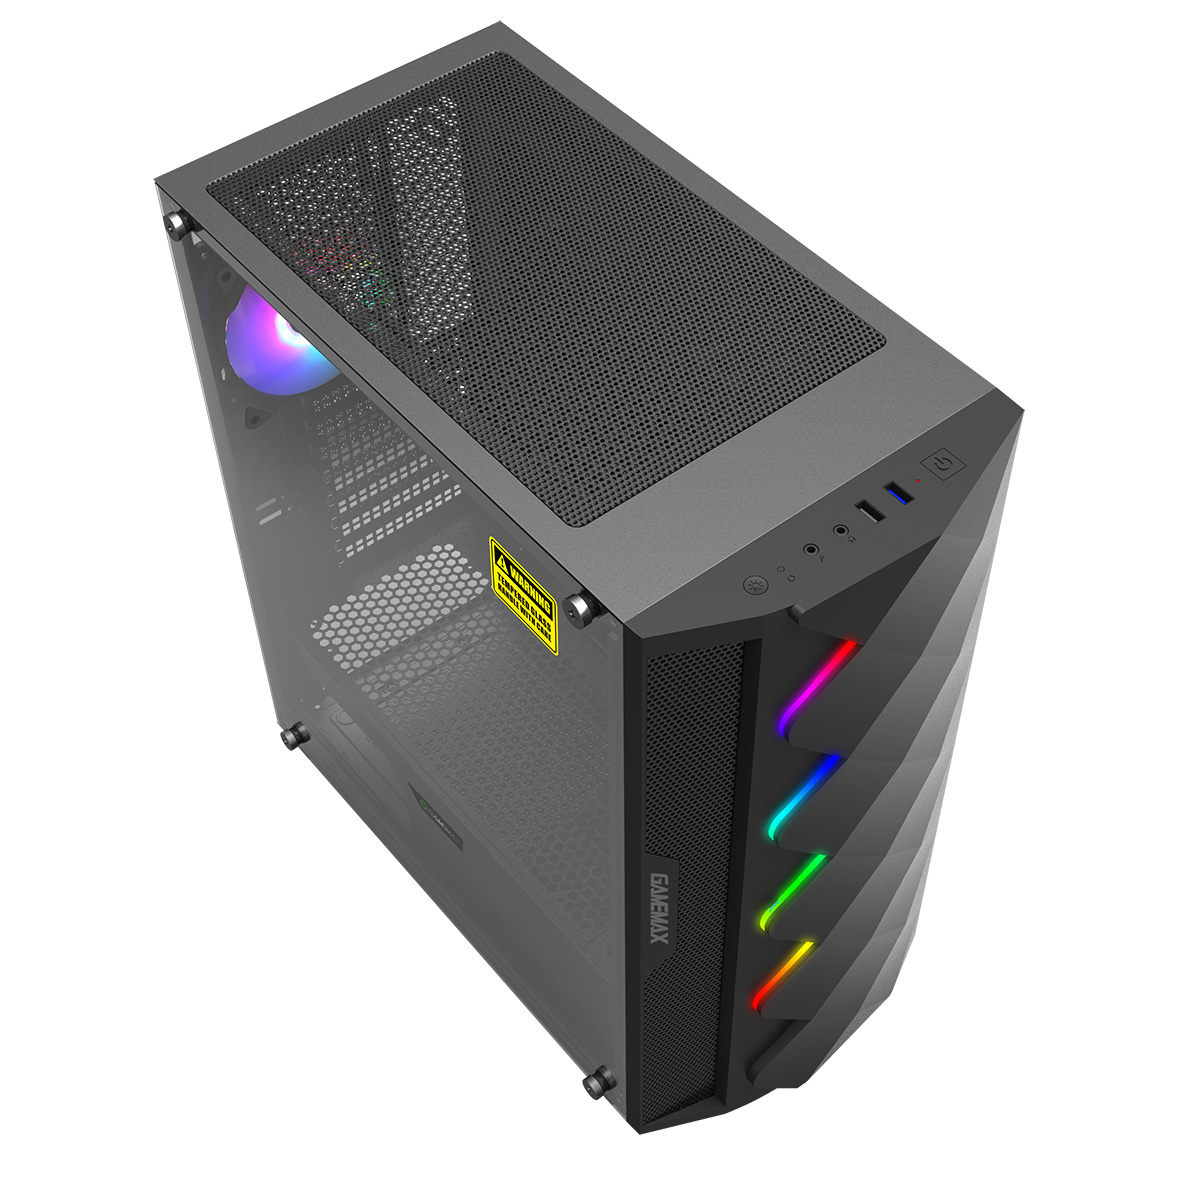  GameMax Black Diamond ARGB Mid-Tower PC Gaming Case, ATX, 3 Pin  Aura Male & Female Connectors, Built in ARGB LED Strip, 1 x 120mm ARGB Fan  Included, Water-Cooling Ready